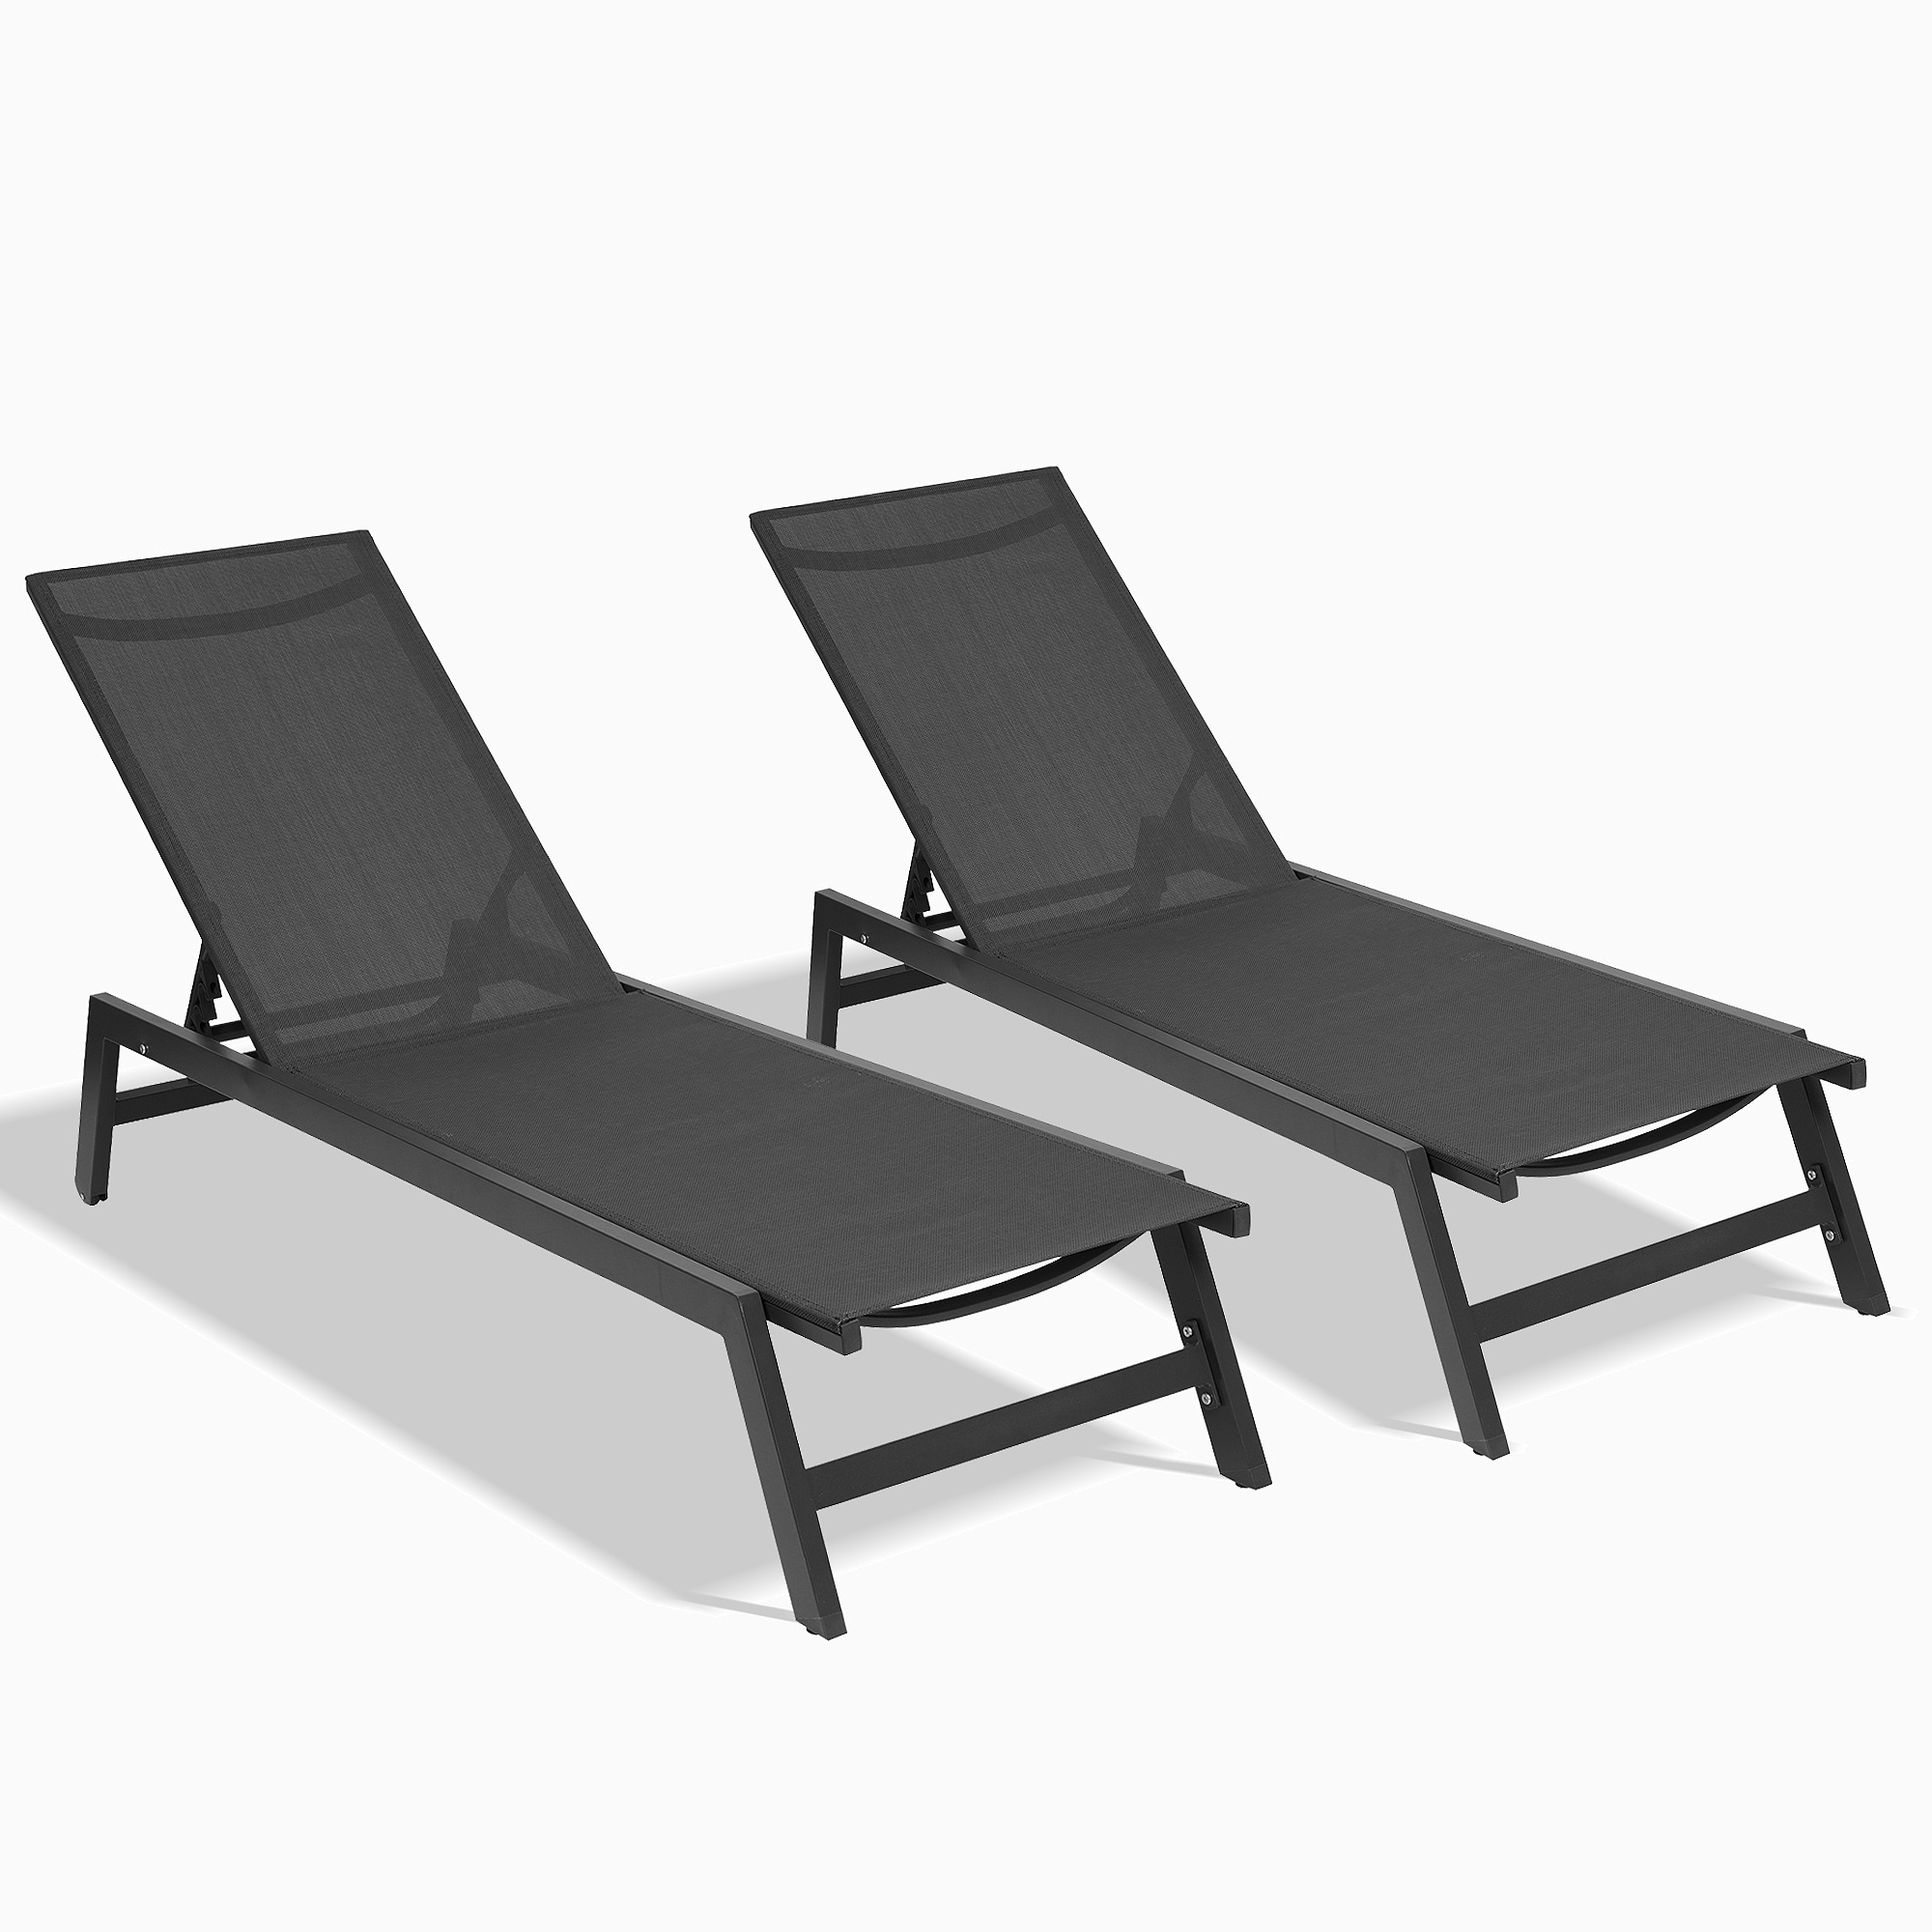 2 Pieces Set Outdoor Adjustable Aluminum Recliner Chaise Lounge Chairs